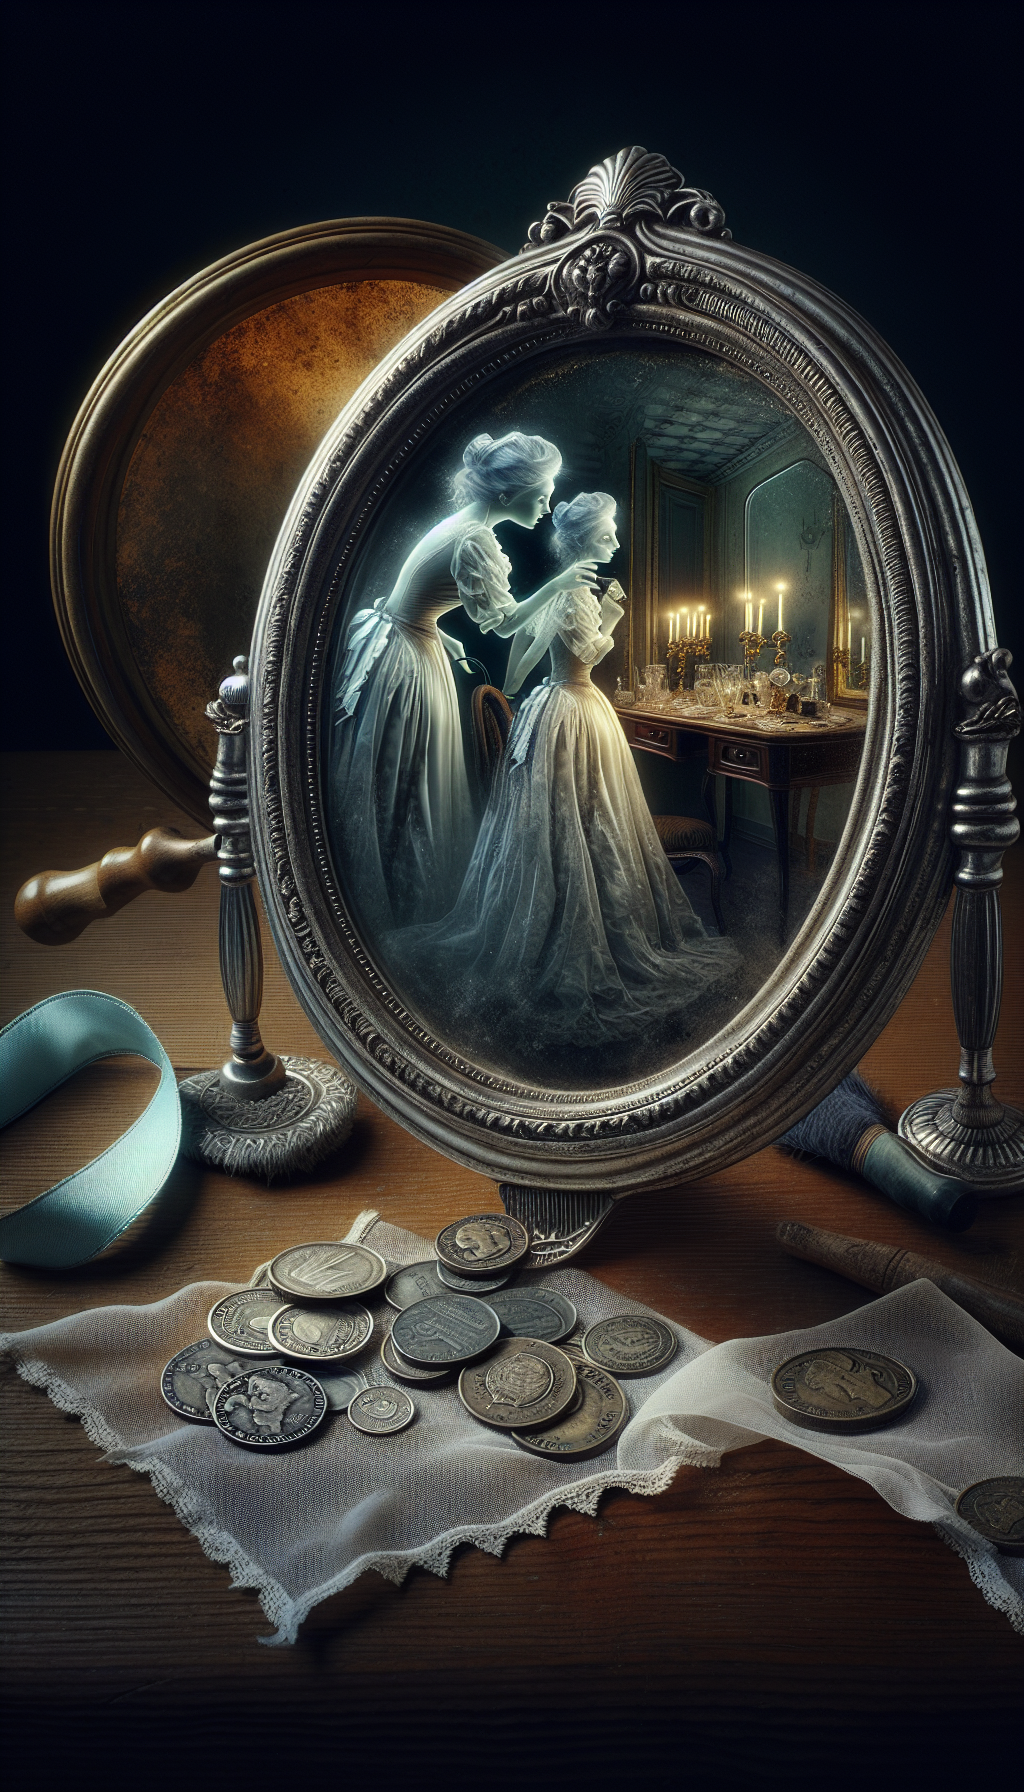 A Victorian-style hand mirror frames the scene, with a ghostly figure polishing its reflective surface, illuminating half the mirror to reveal a vibrant, detailed reflection of an opulent bygone era, while the unpolished half remains dull and obscured. Beside the mirror, antique coins and a ribbon-labeled scroll reading "Value Through Restoration" hint at the increased worth with proper care.